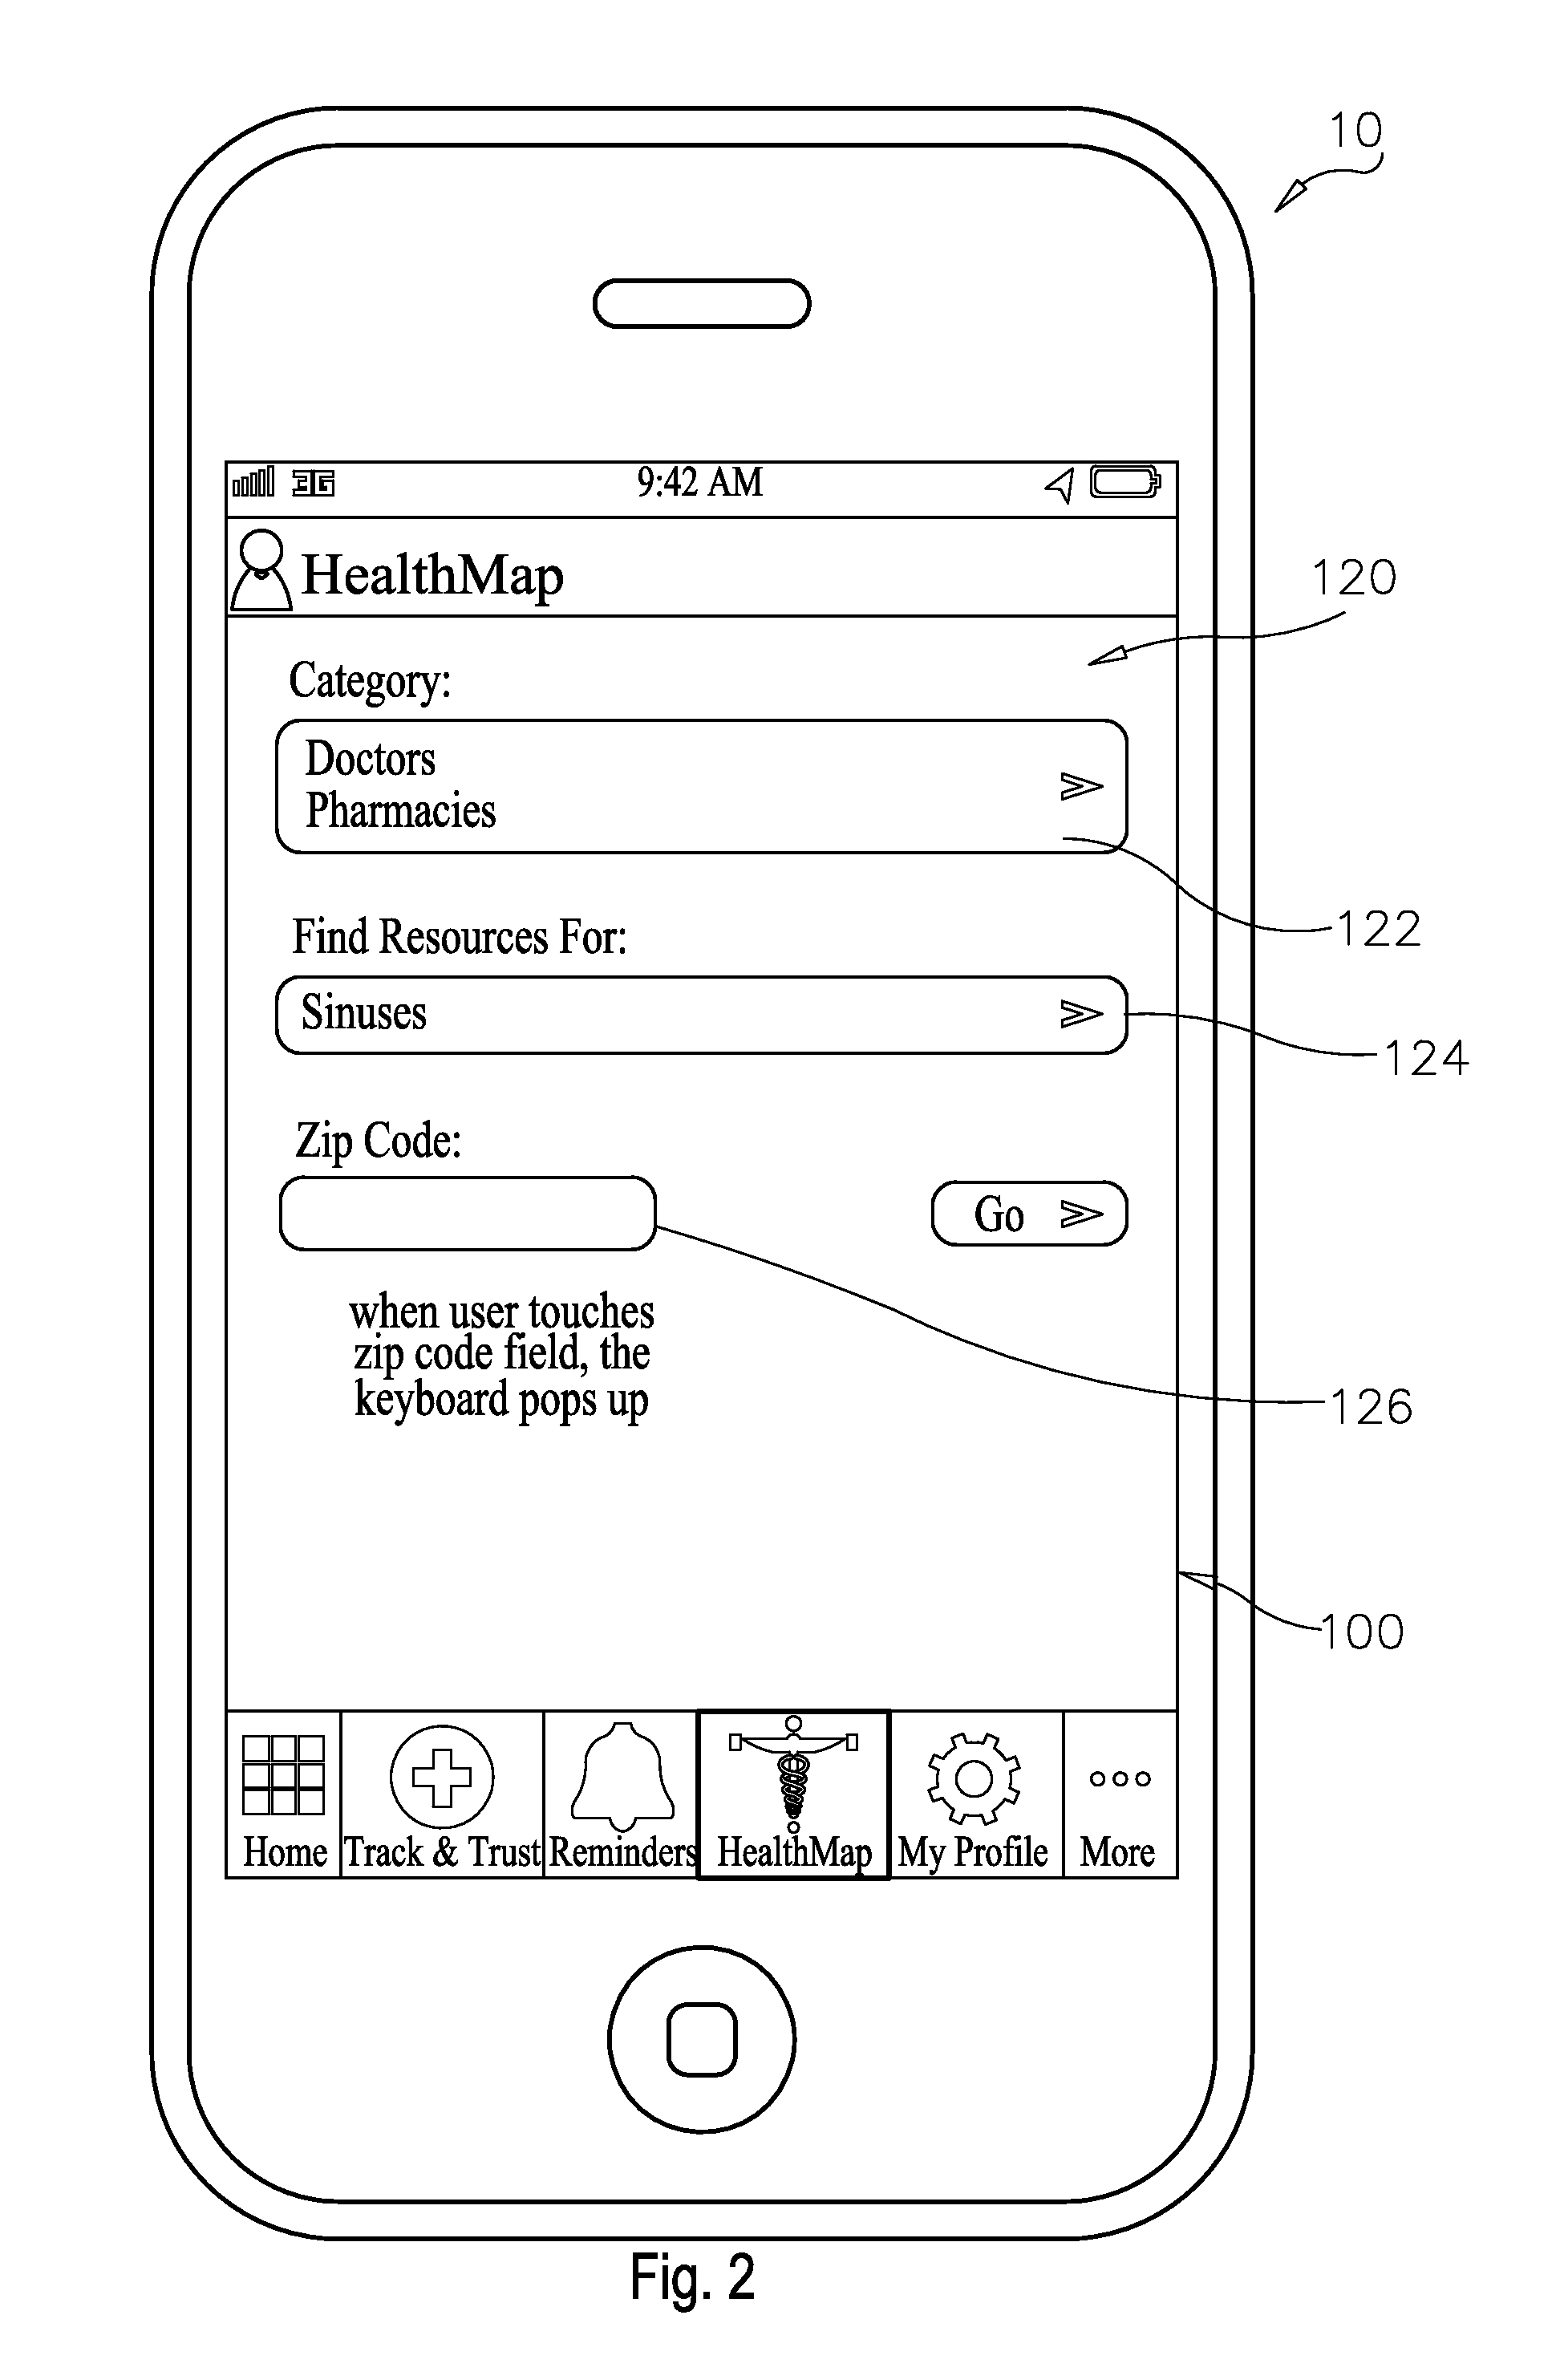 Mobile Medical Information System and Methods of Use